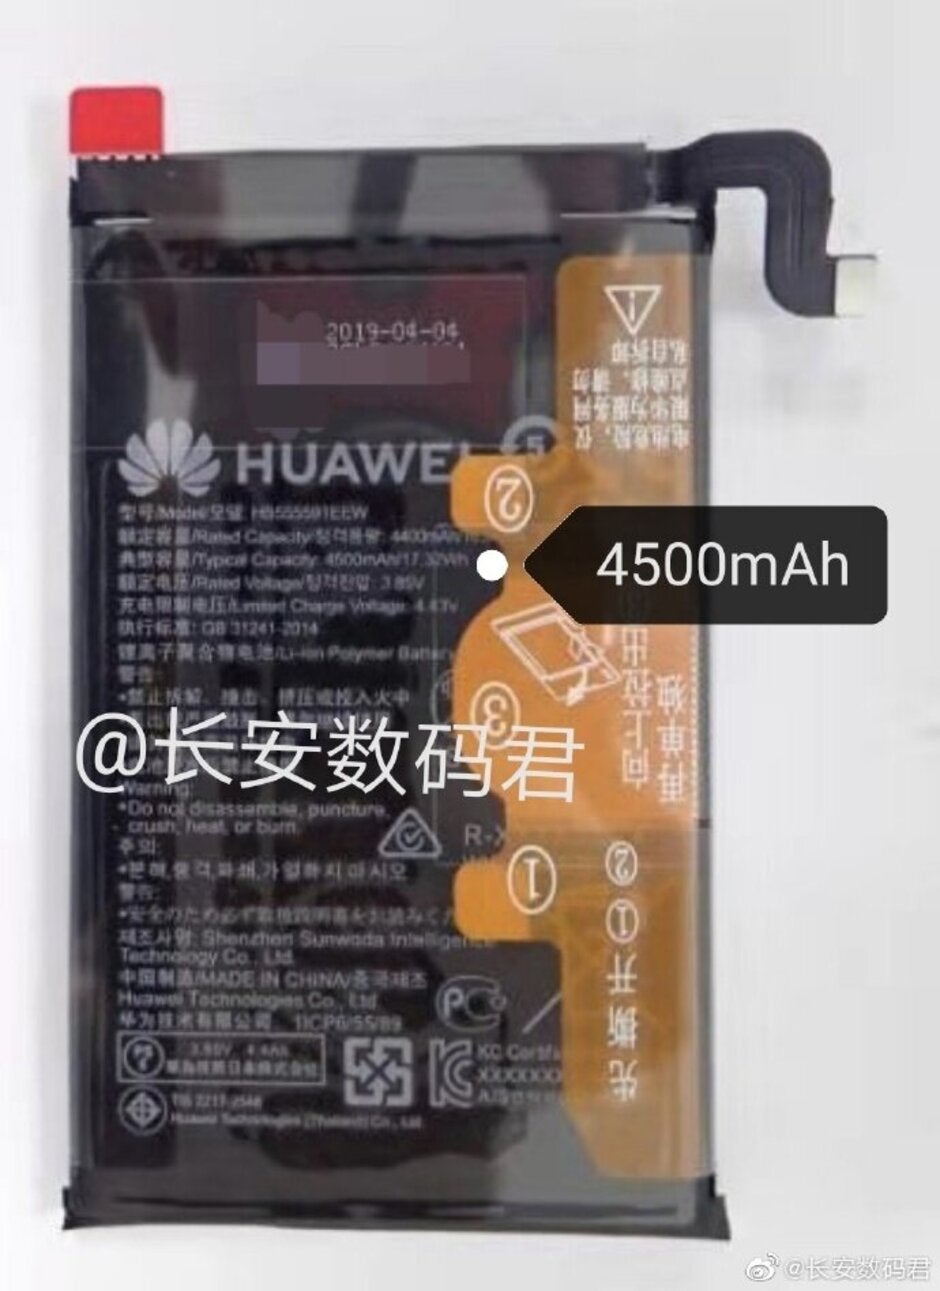 The Huawei Mate 30 Pro will allegedly use this 4500mAh battery - Battery capacities leaked for the Huawei Mate 30 and Mate 30 Pro